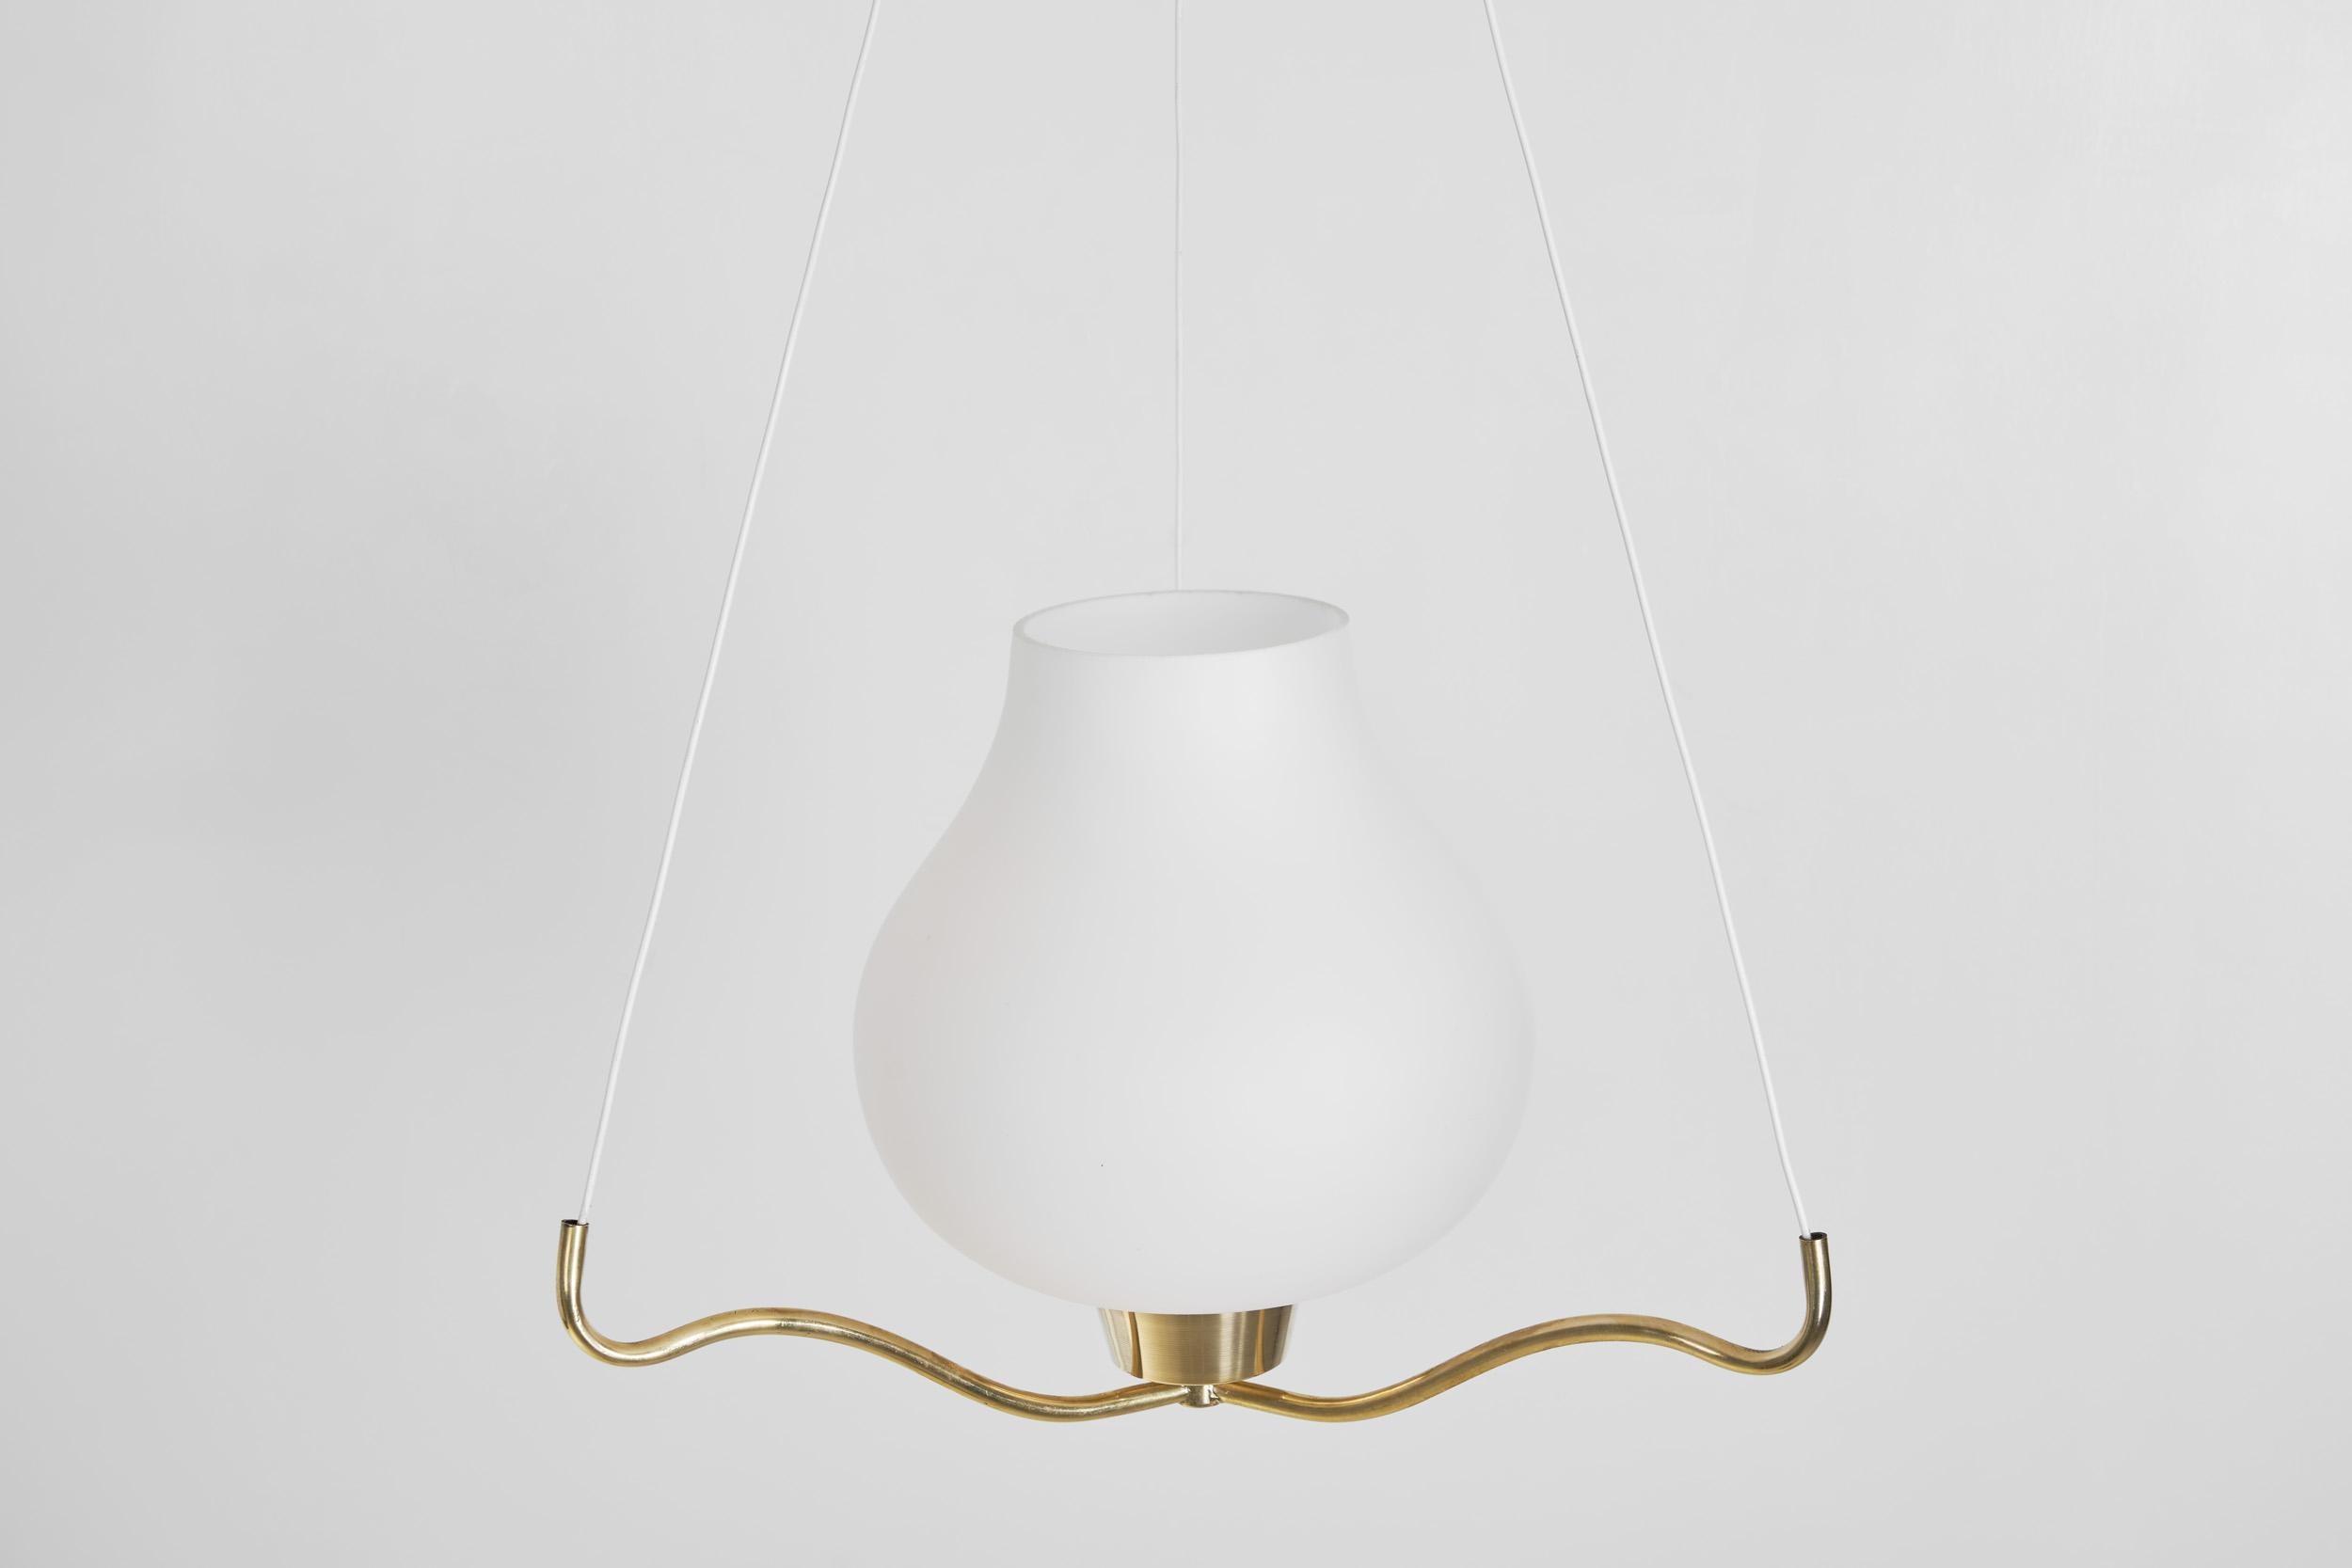 Brass and Opal Glass Pendant Ceiling Lamp by ASEA, Sweden 1950s For Sale 2